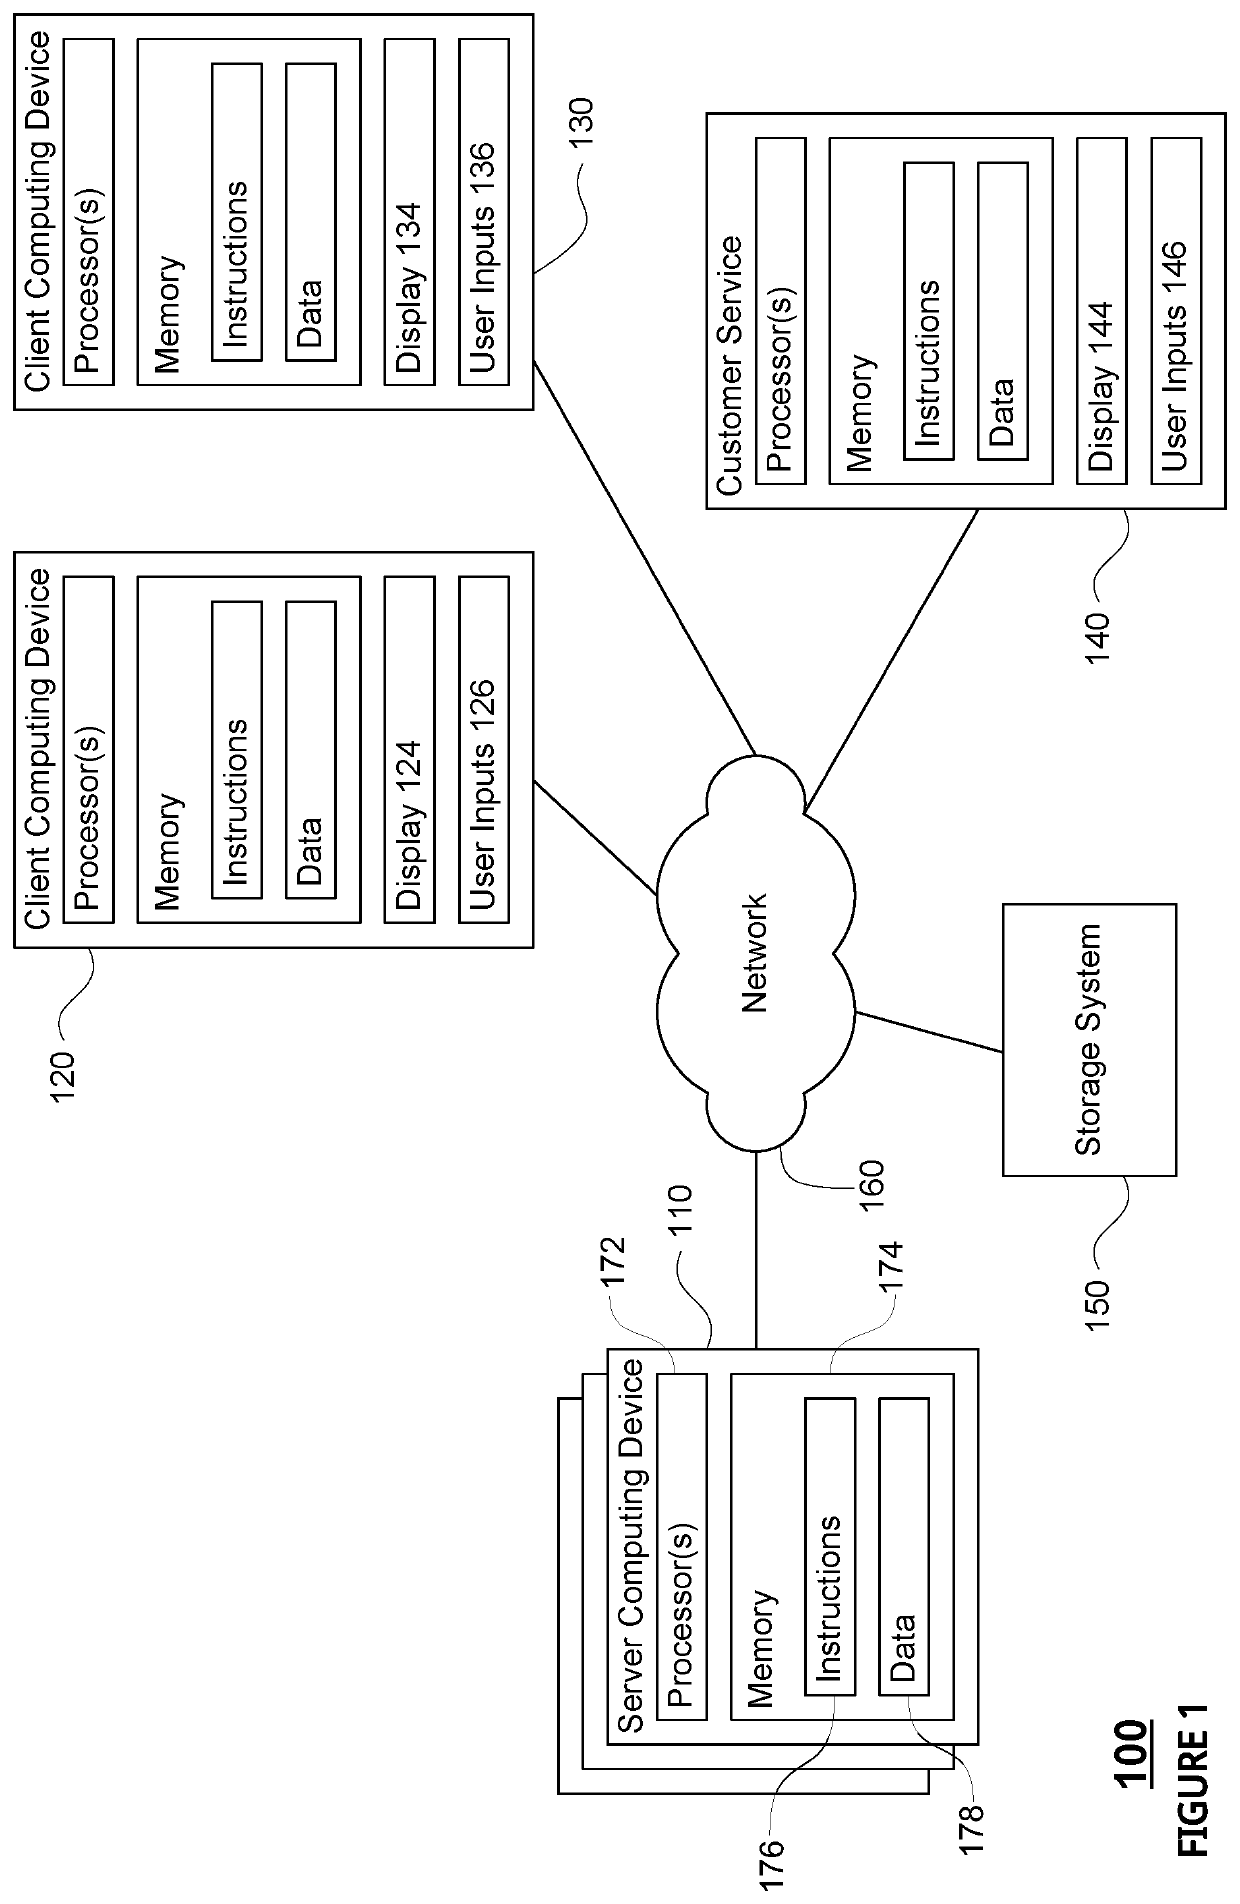 Transferral Of Process State And/Or Components In Computing Environments